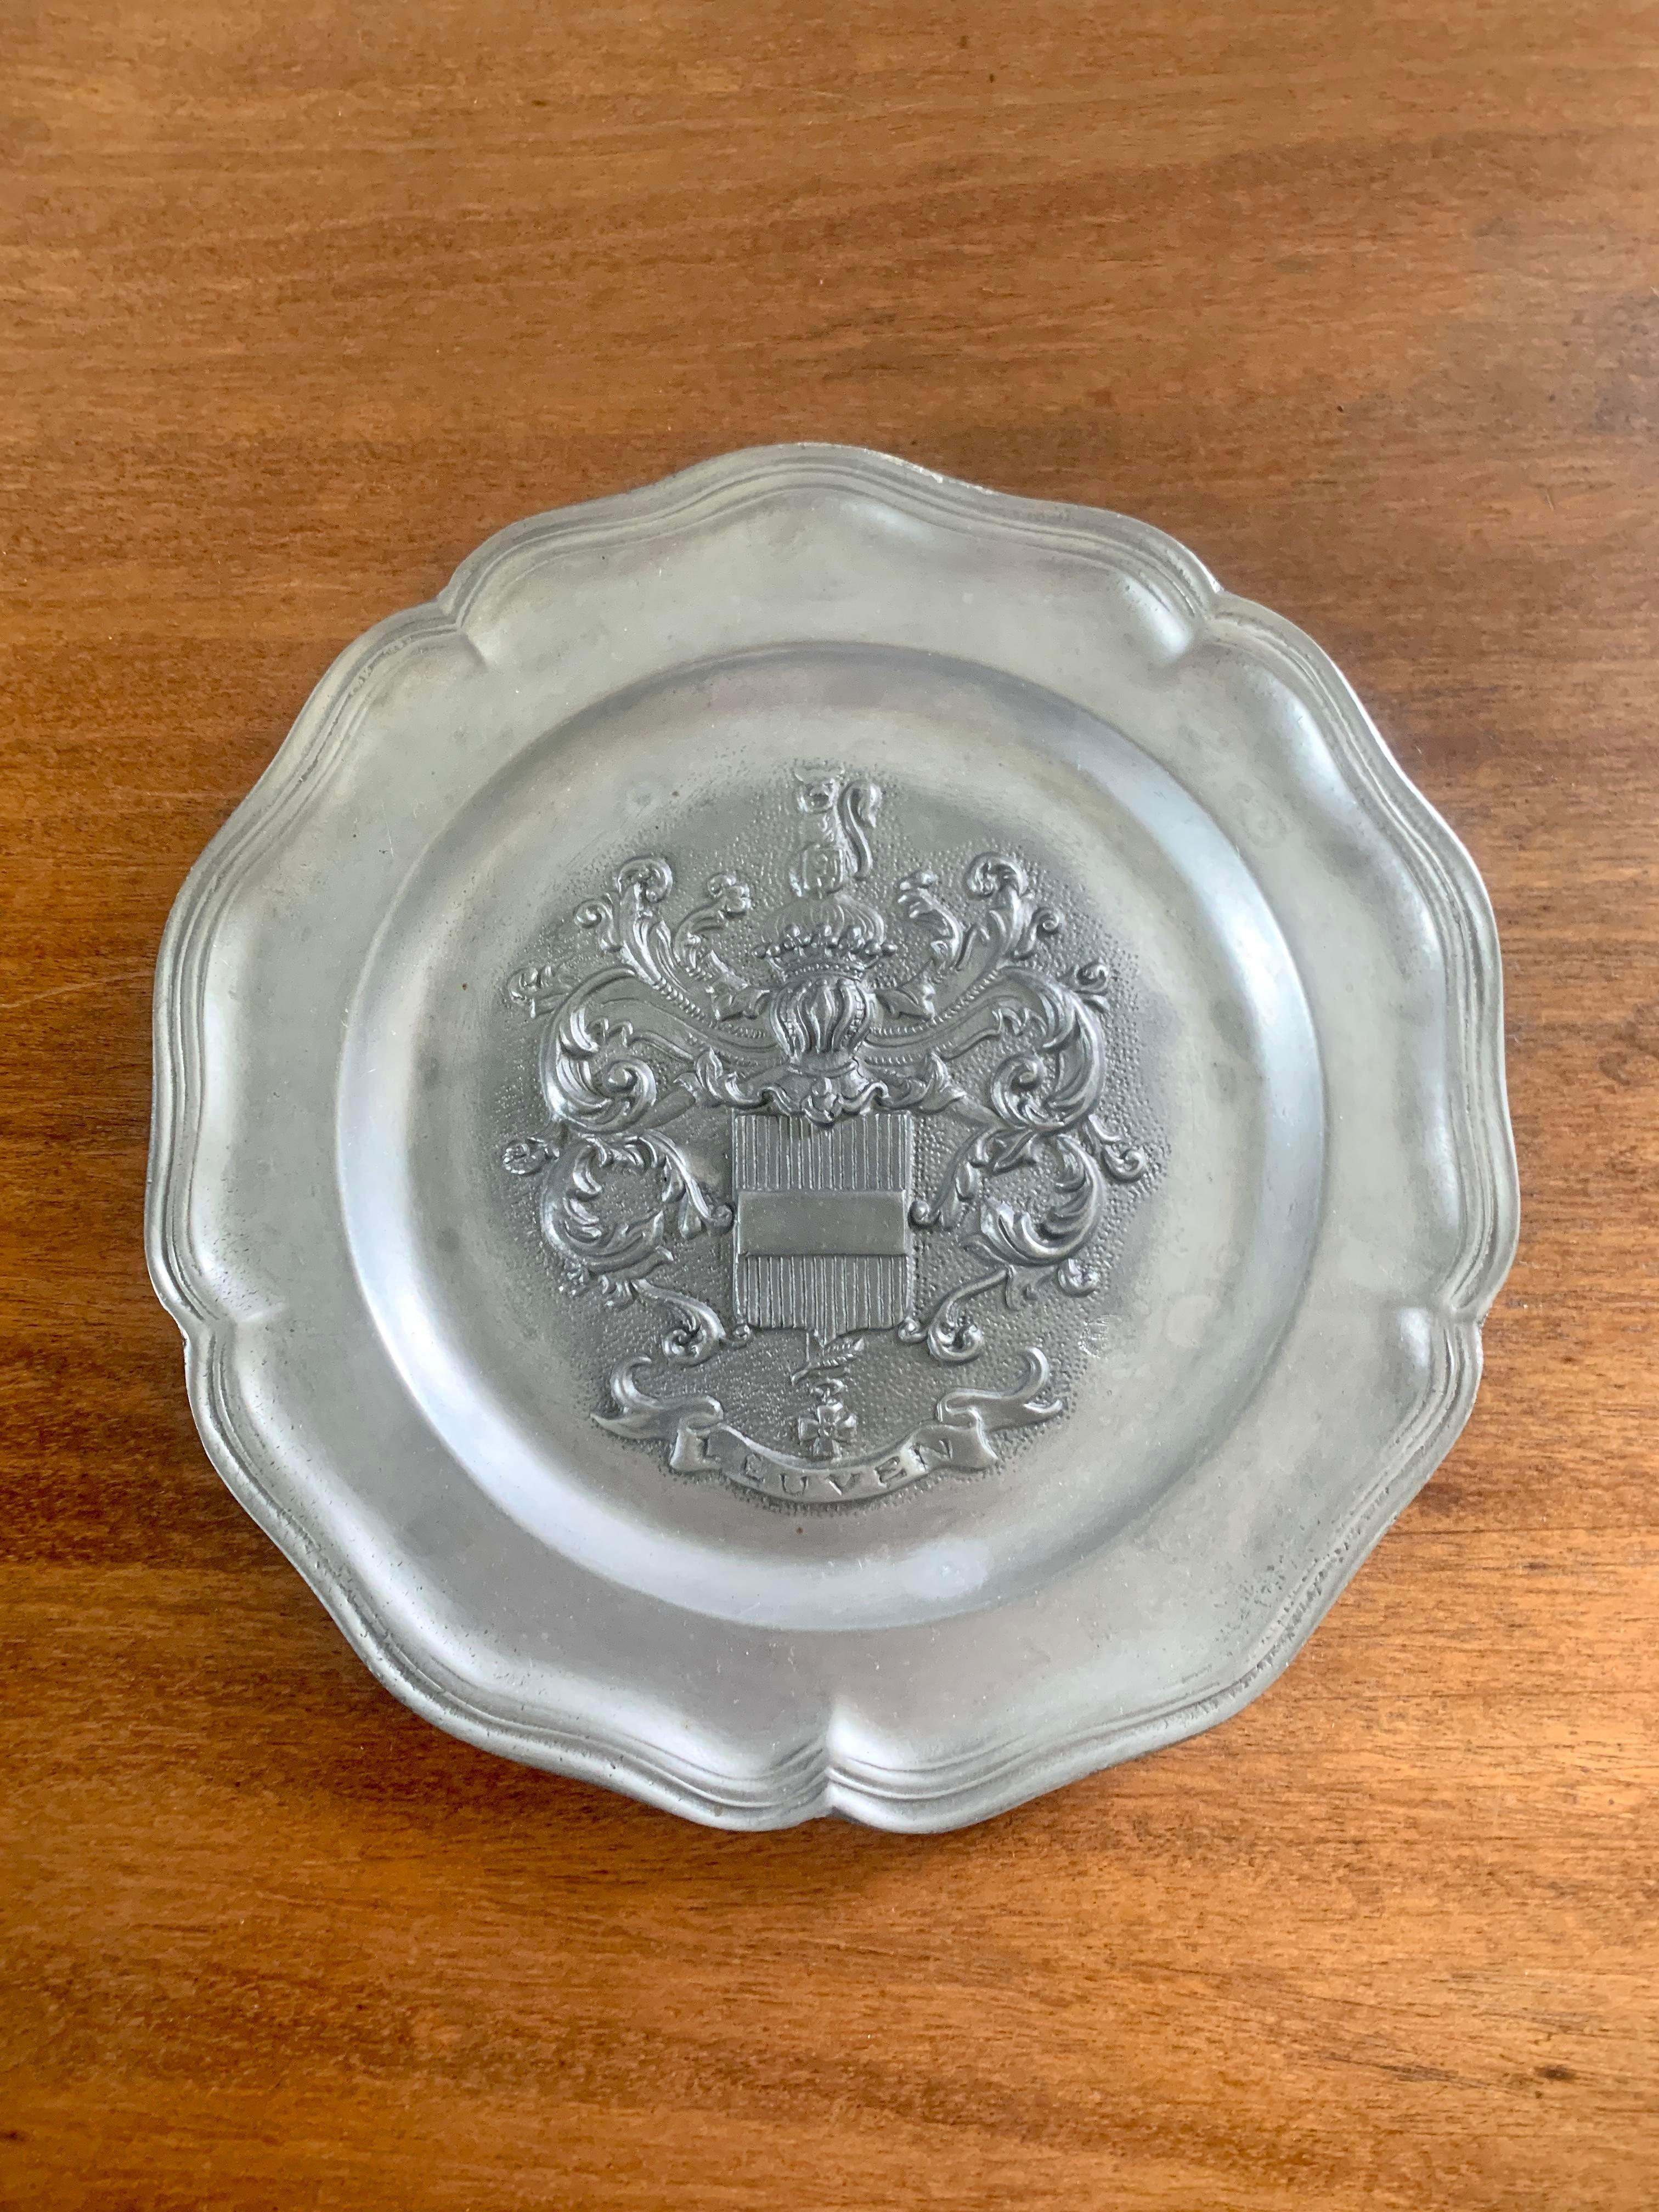 A beautiful pewter wall plate featuring a coat of arms of 